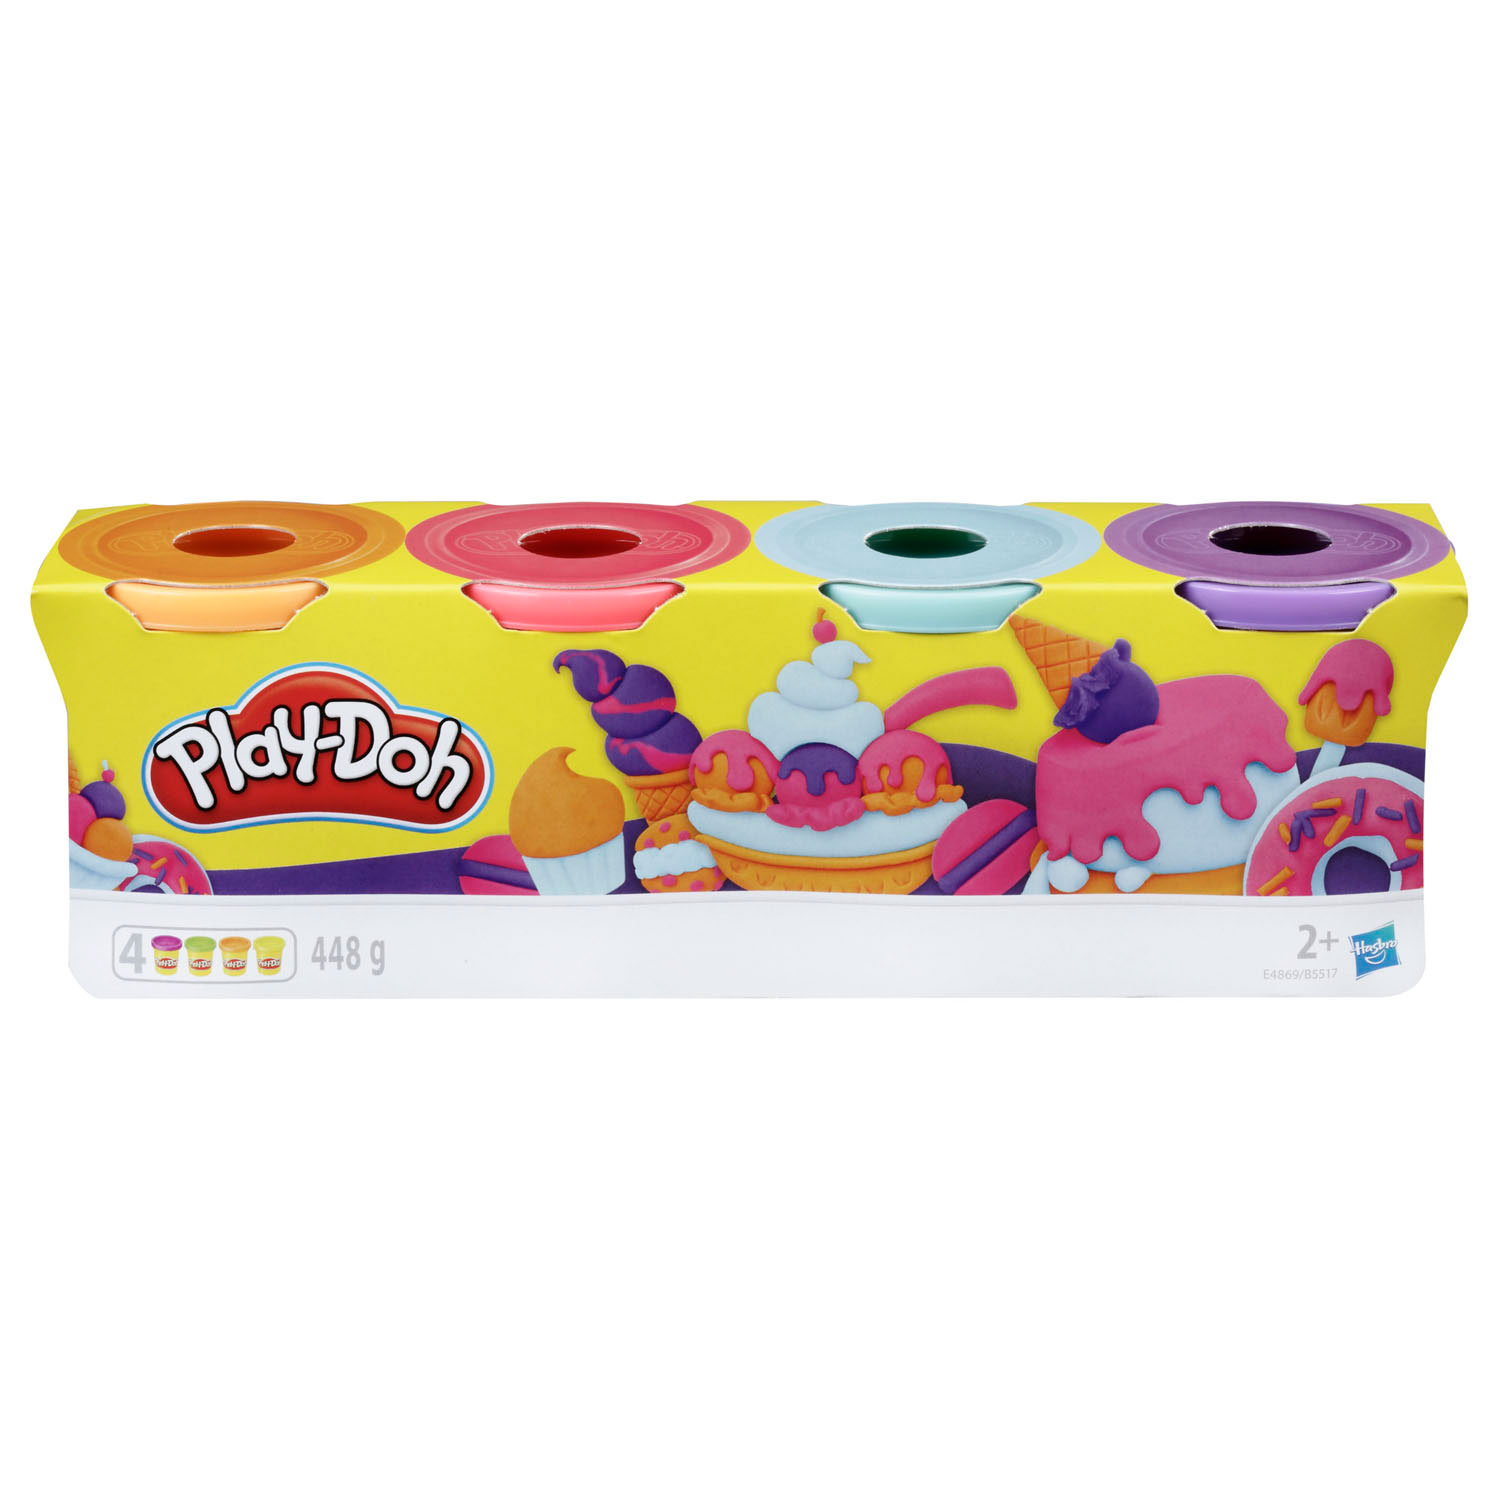 Play-Doh 4-Pack (couleurs douces)